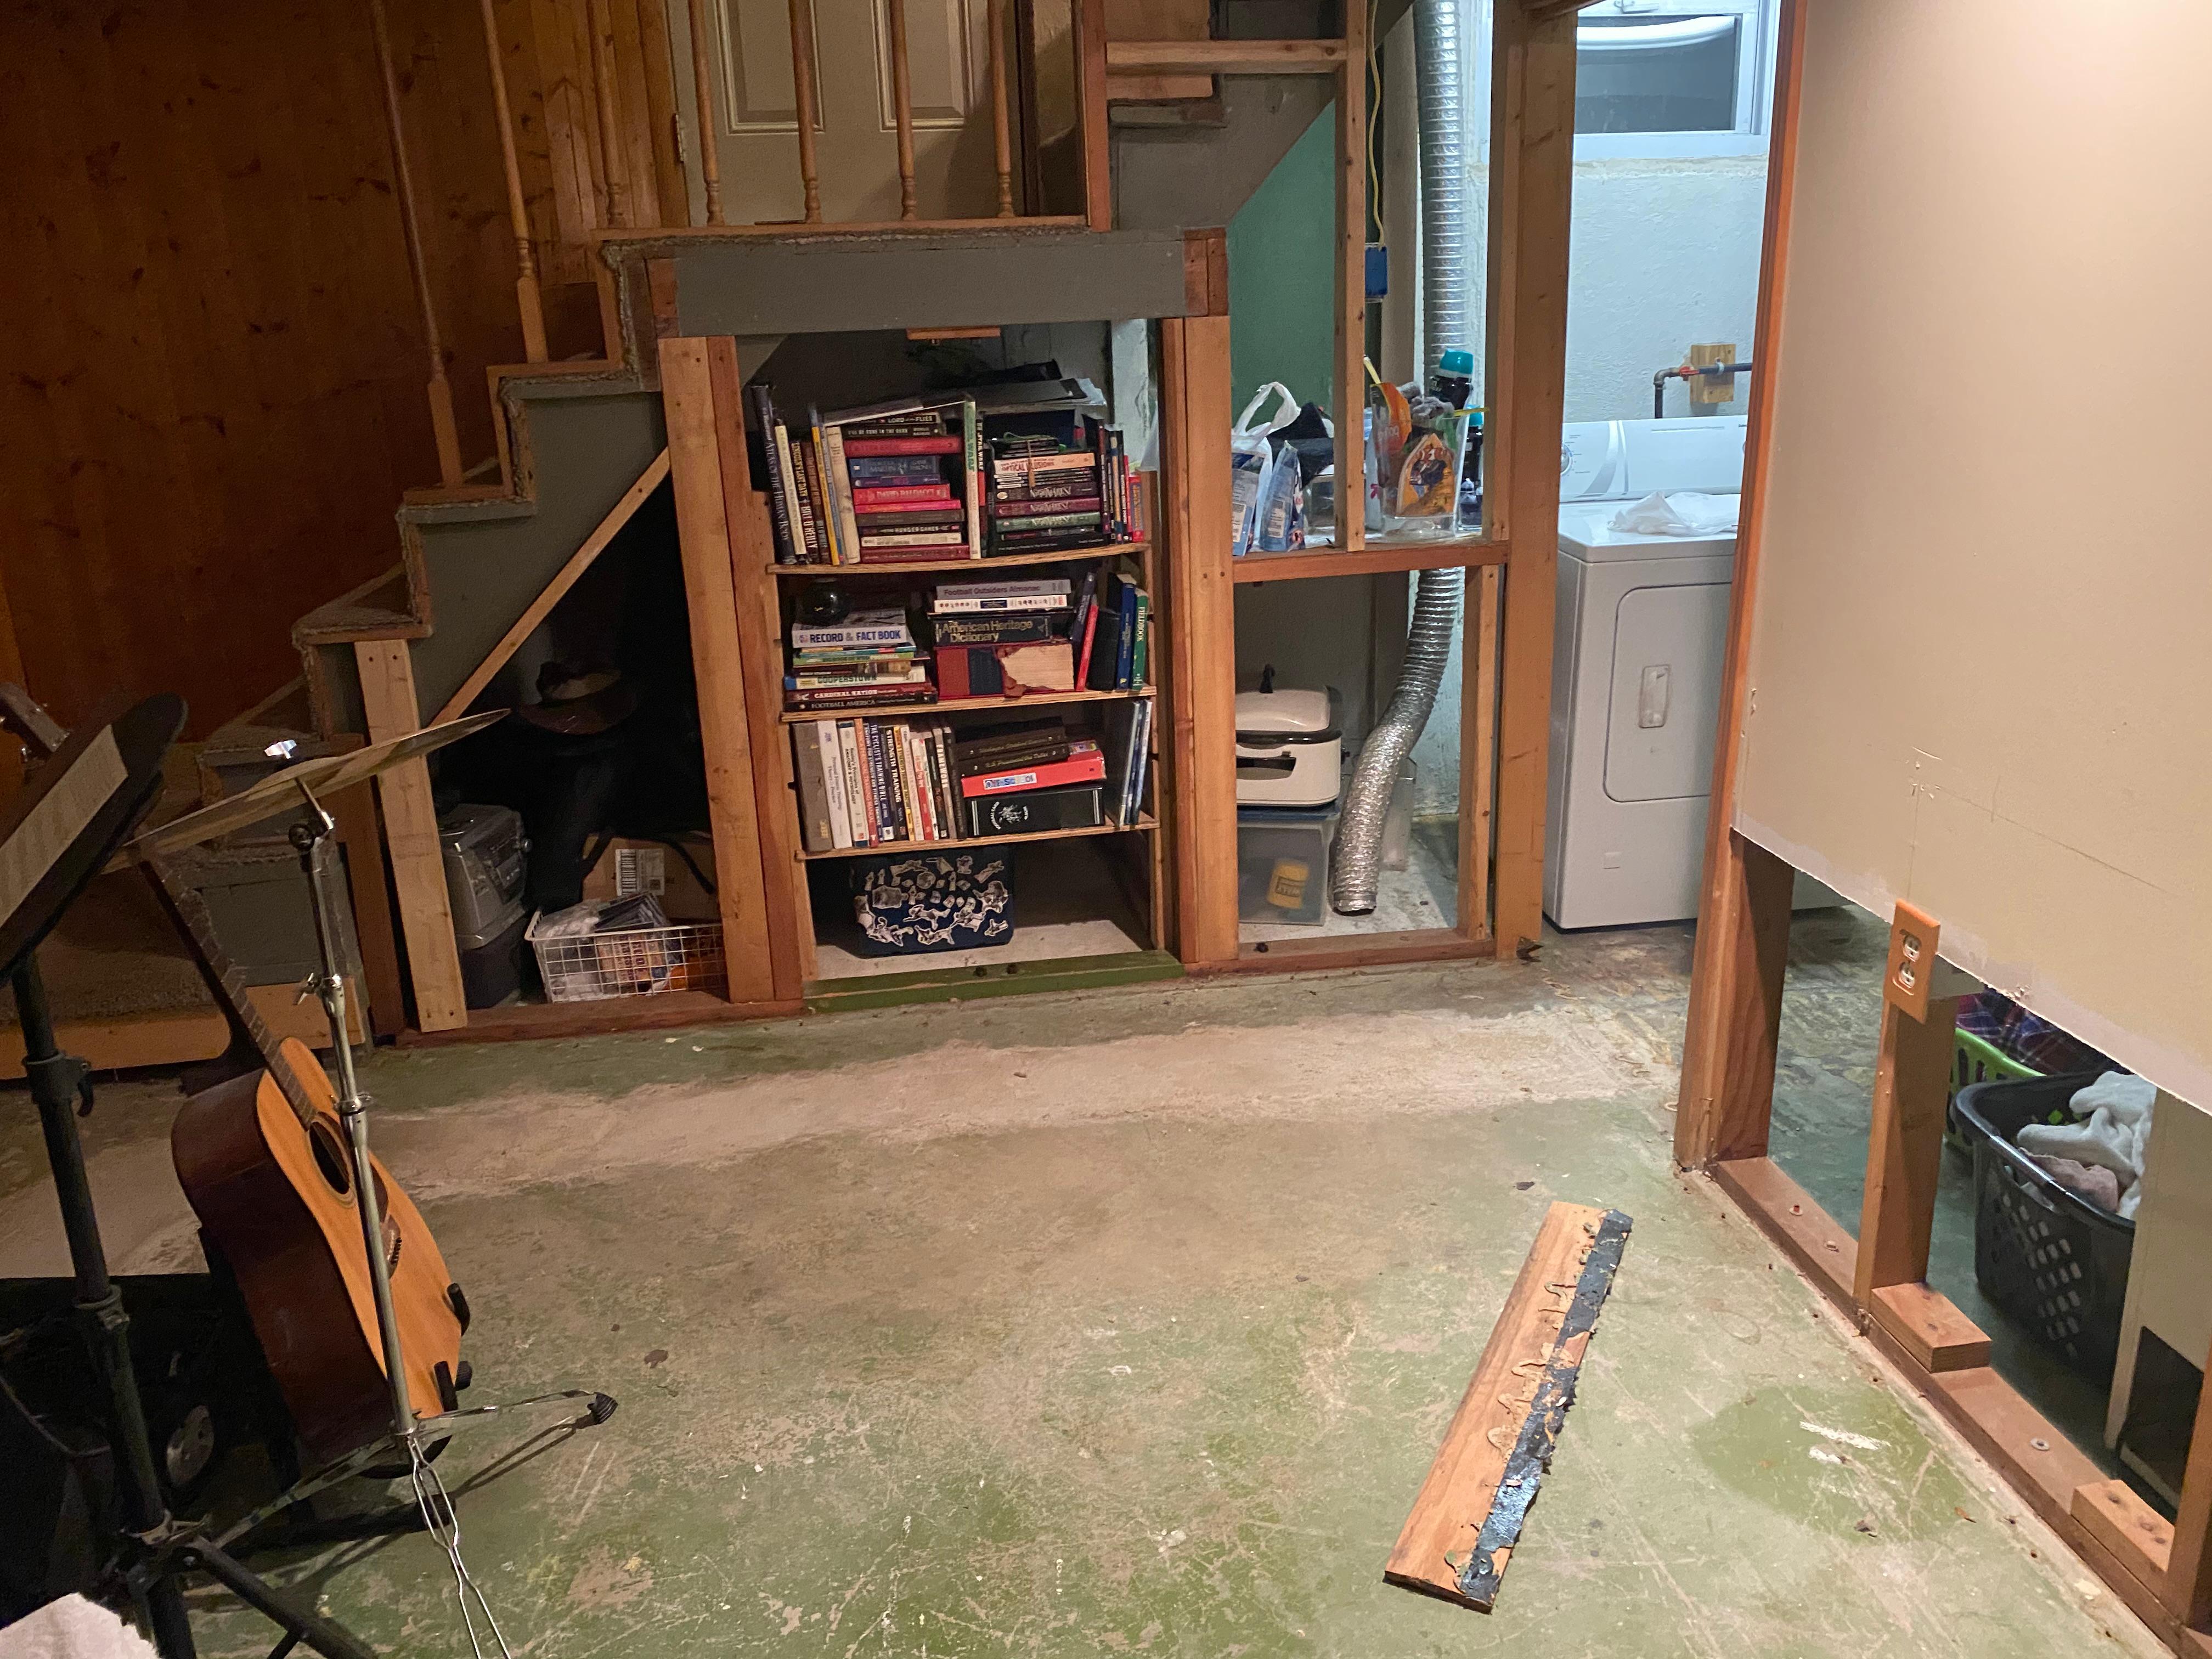 Working on completing this water damage restoration job with some reconstruction of the flood cuts we made. Our SERVPRO team is your one-stop shop for all things restoration! Call us today!